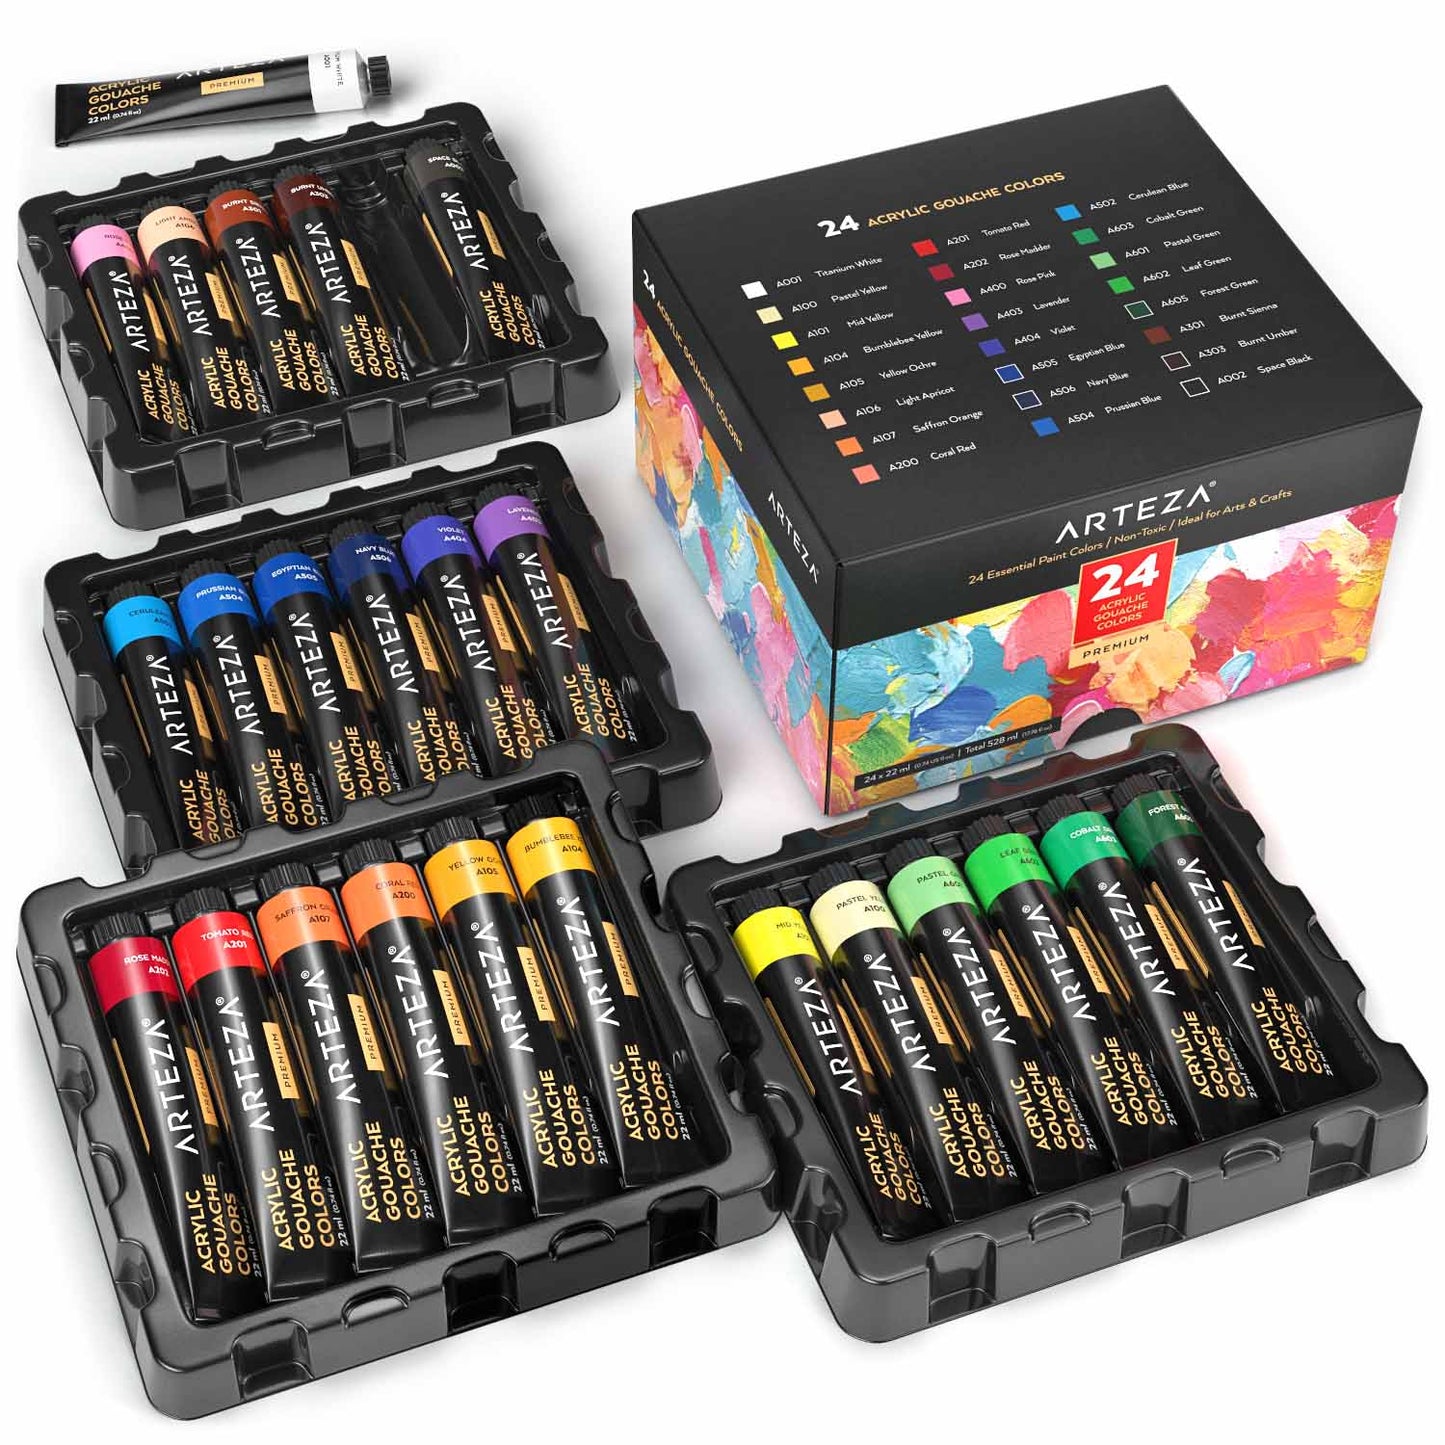  ARTEZA Acrylic and Gouache Paint Set Bundle, Painting Art  Supplies for Artist, Hobby Painters & Beginners : Arts, Crafts & Sewing